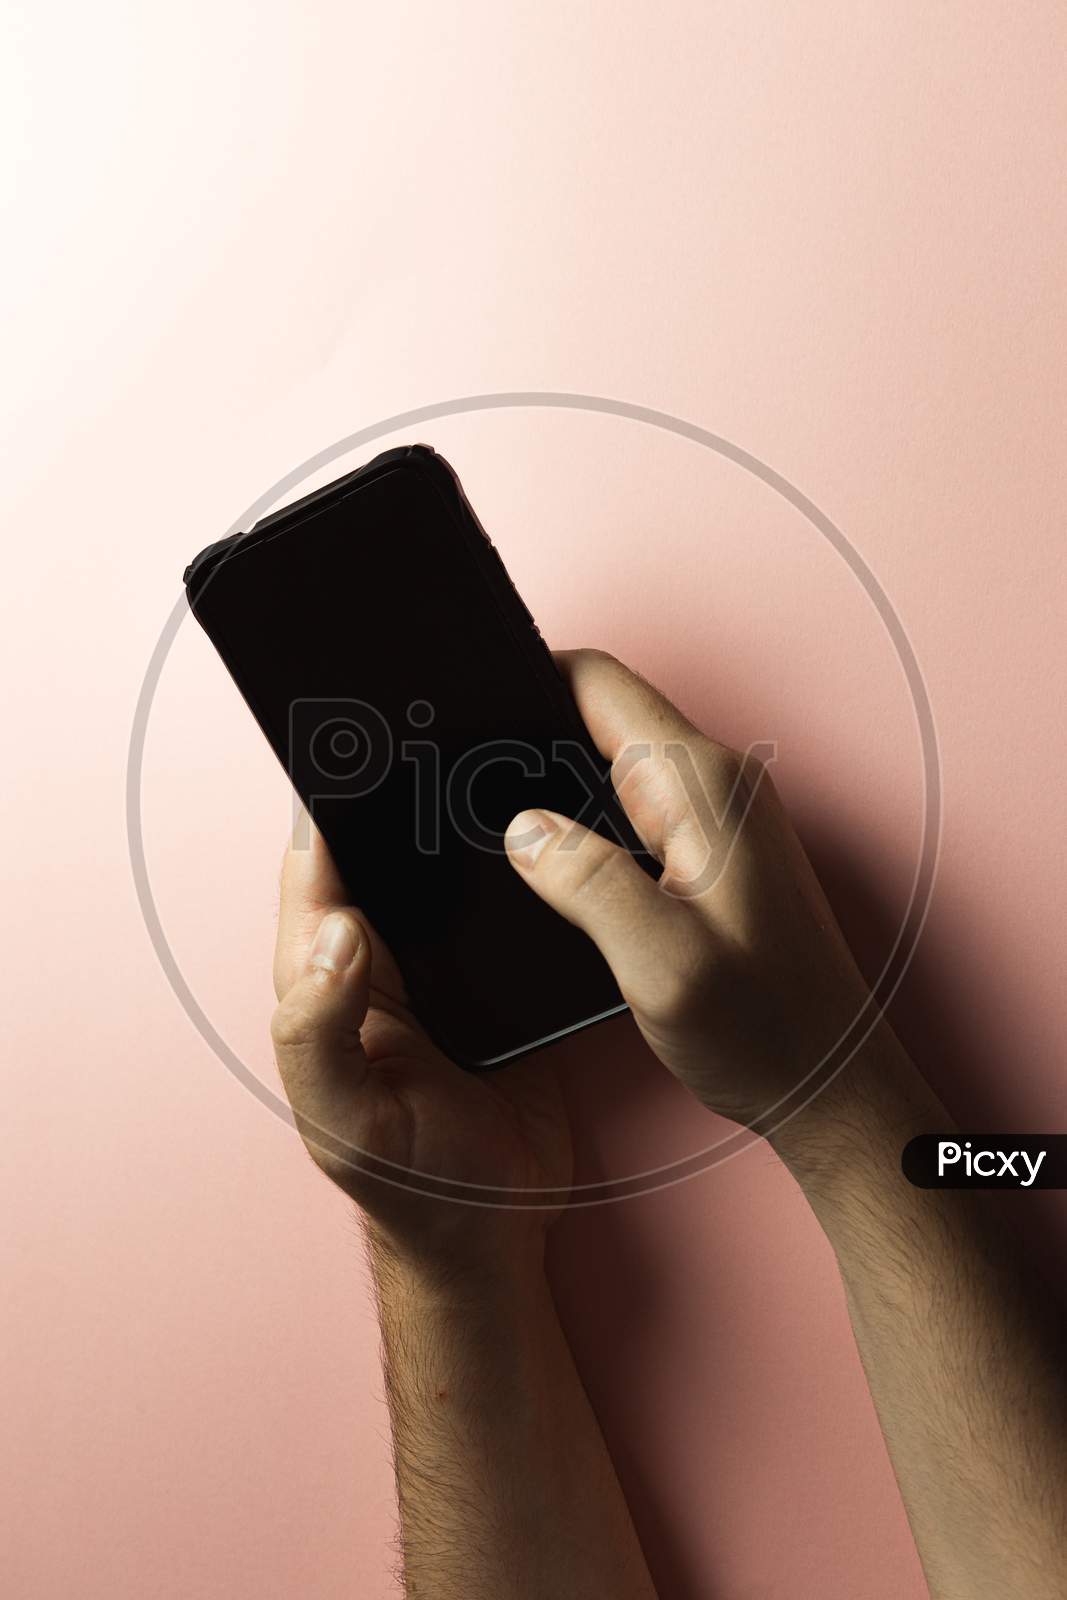 Top View Of Two Young Hands Using A Mobile Phone With Copy Space And A Black Screen Over A Pink Pastel Background